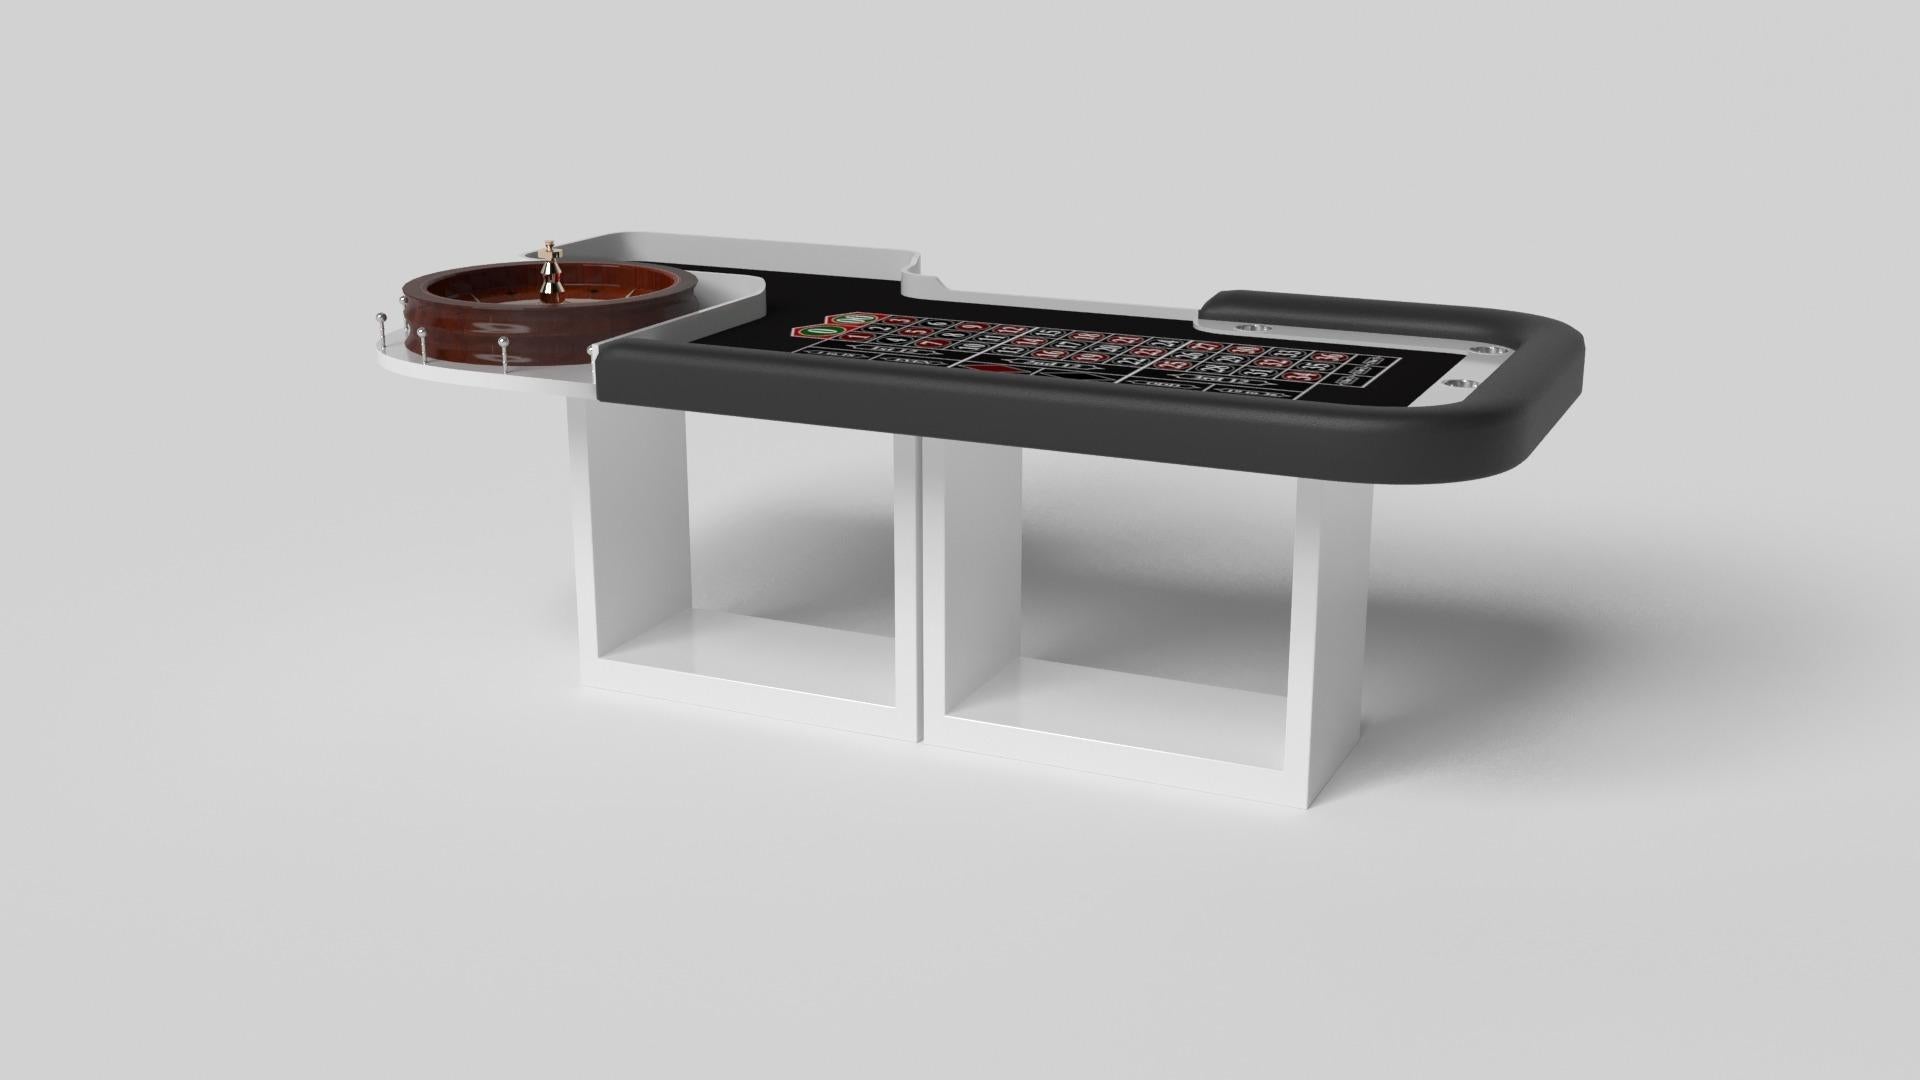 Supported by two rectangular open pedestals as the base, the Ambrosia roulette table is modern and minimalistic with its combination of simple, geometric forms. Viewed from the front, the use of negative space is evident; viewed from the side, the